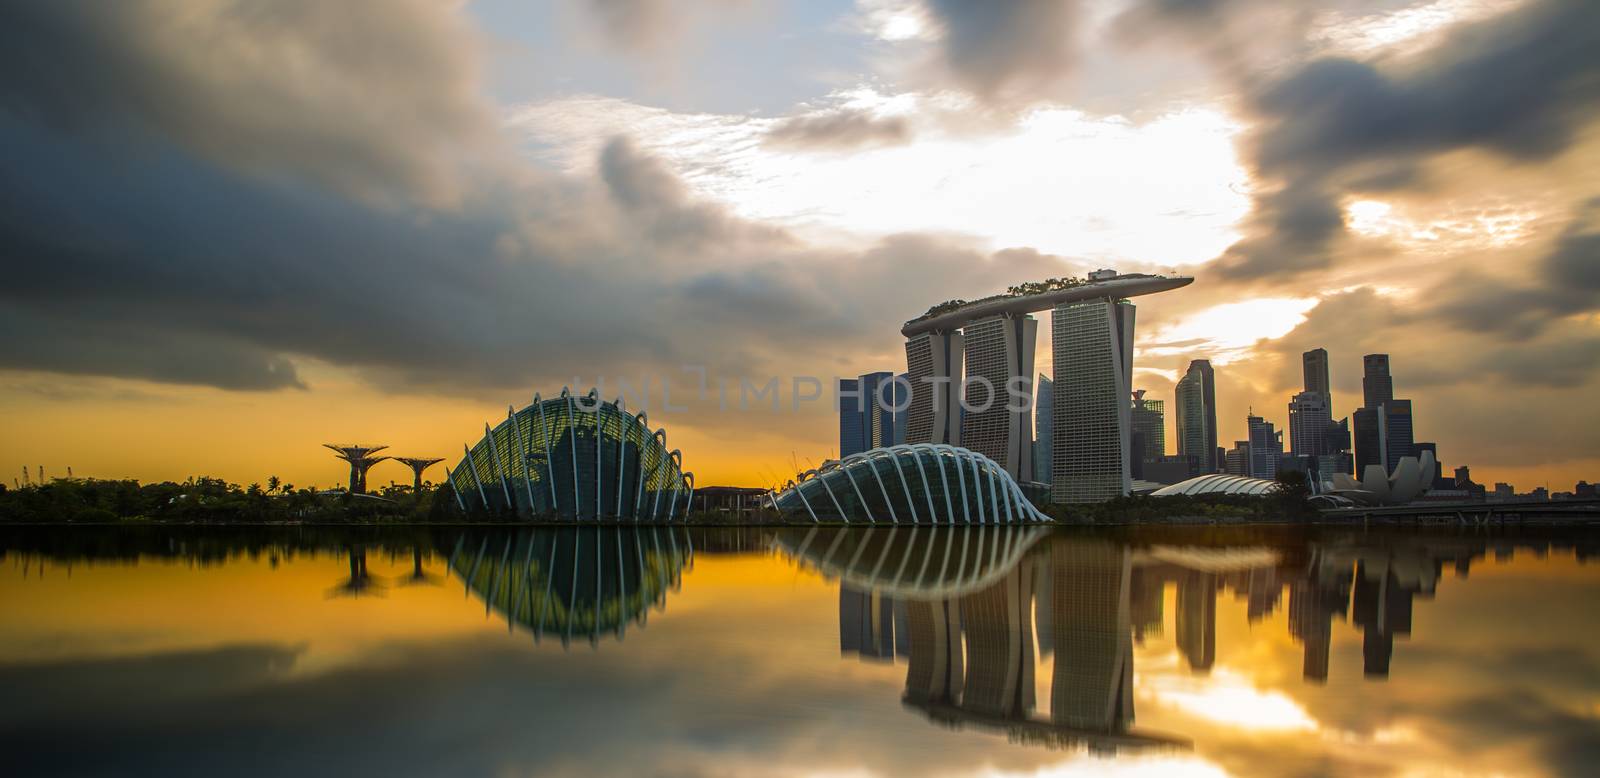 Marina Bay Sand and Garden by the bay, Singapore by williamneokh